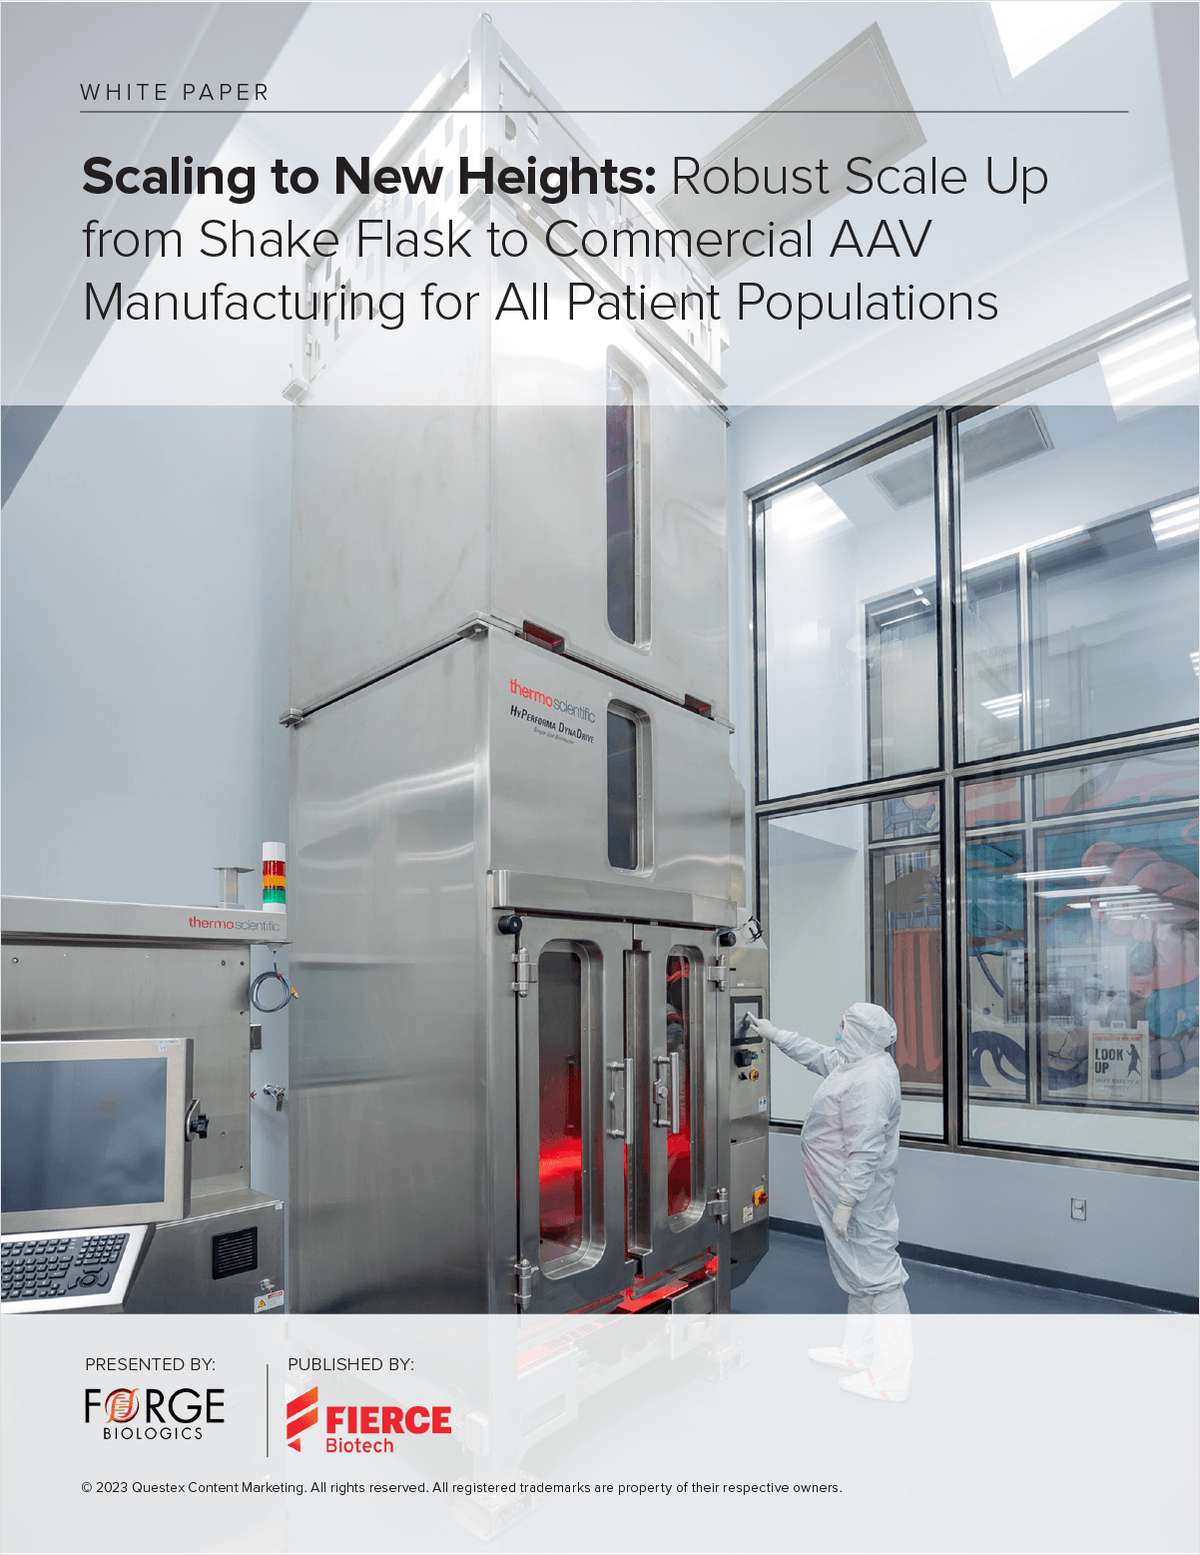 Scaling to New Heights: Robust Scale Up from Shake Flask to Commercial AAV Manufacturing for All Patient Populations